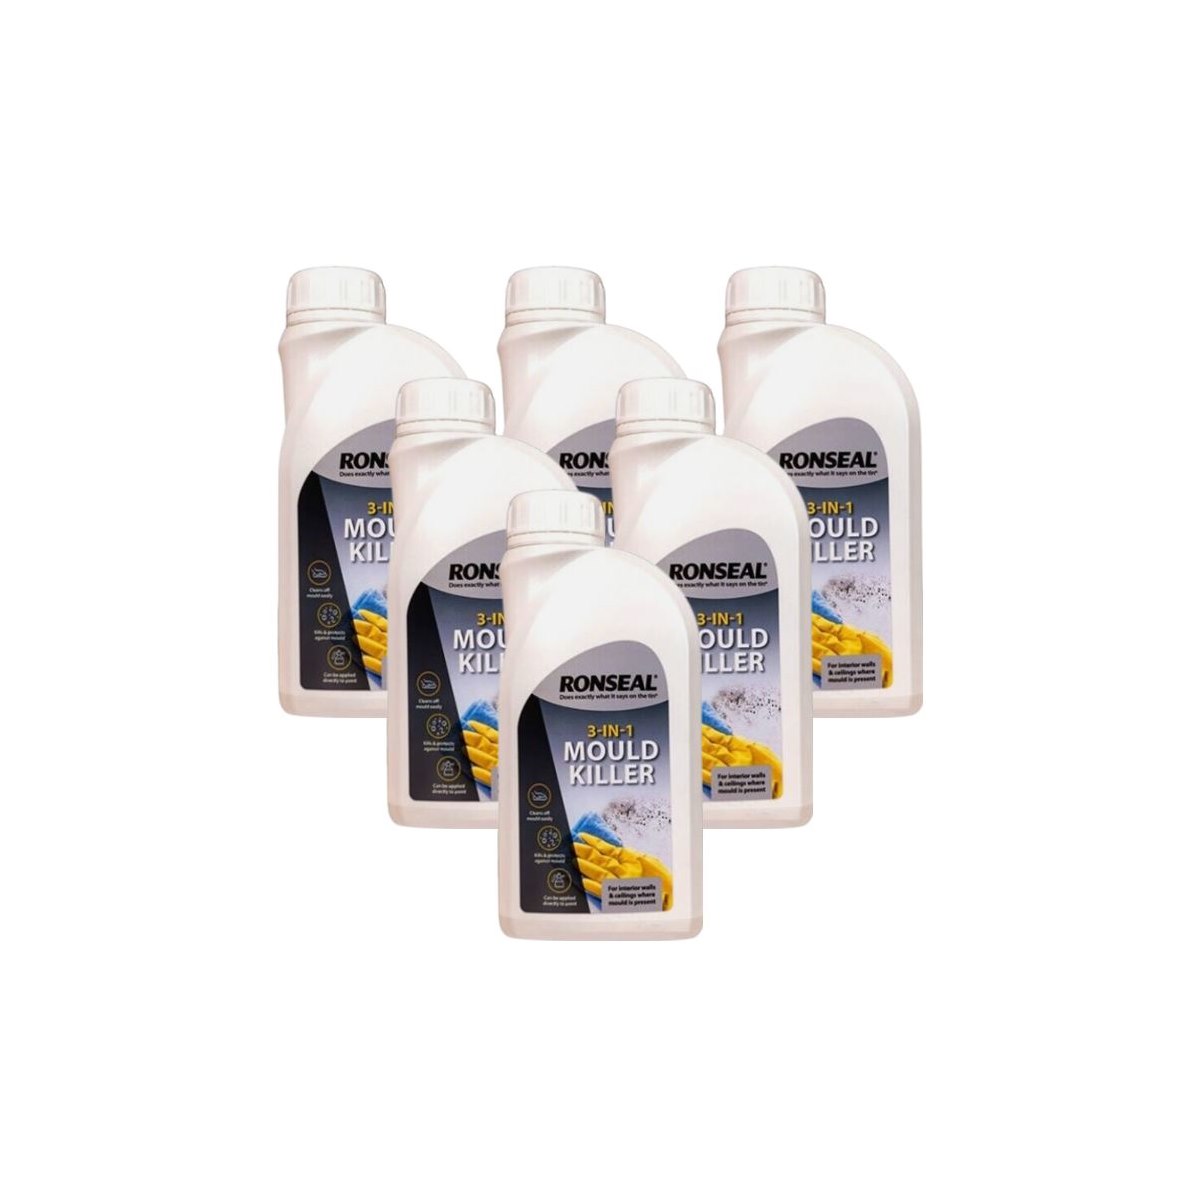 Case of 6 x Ronseal 3-in-1 Mould Killer 500ml